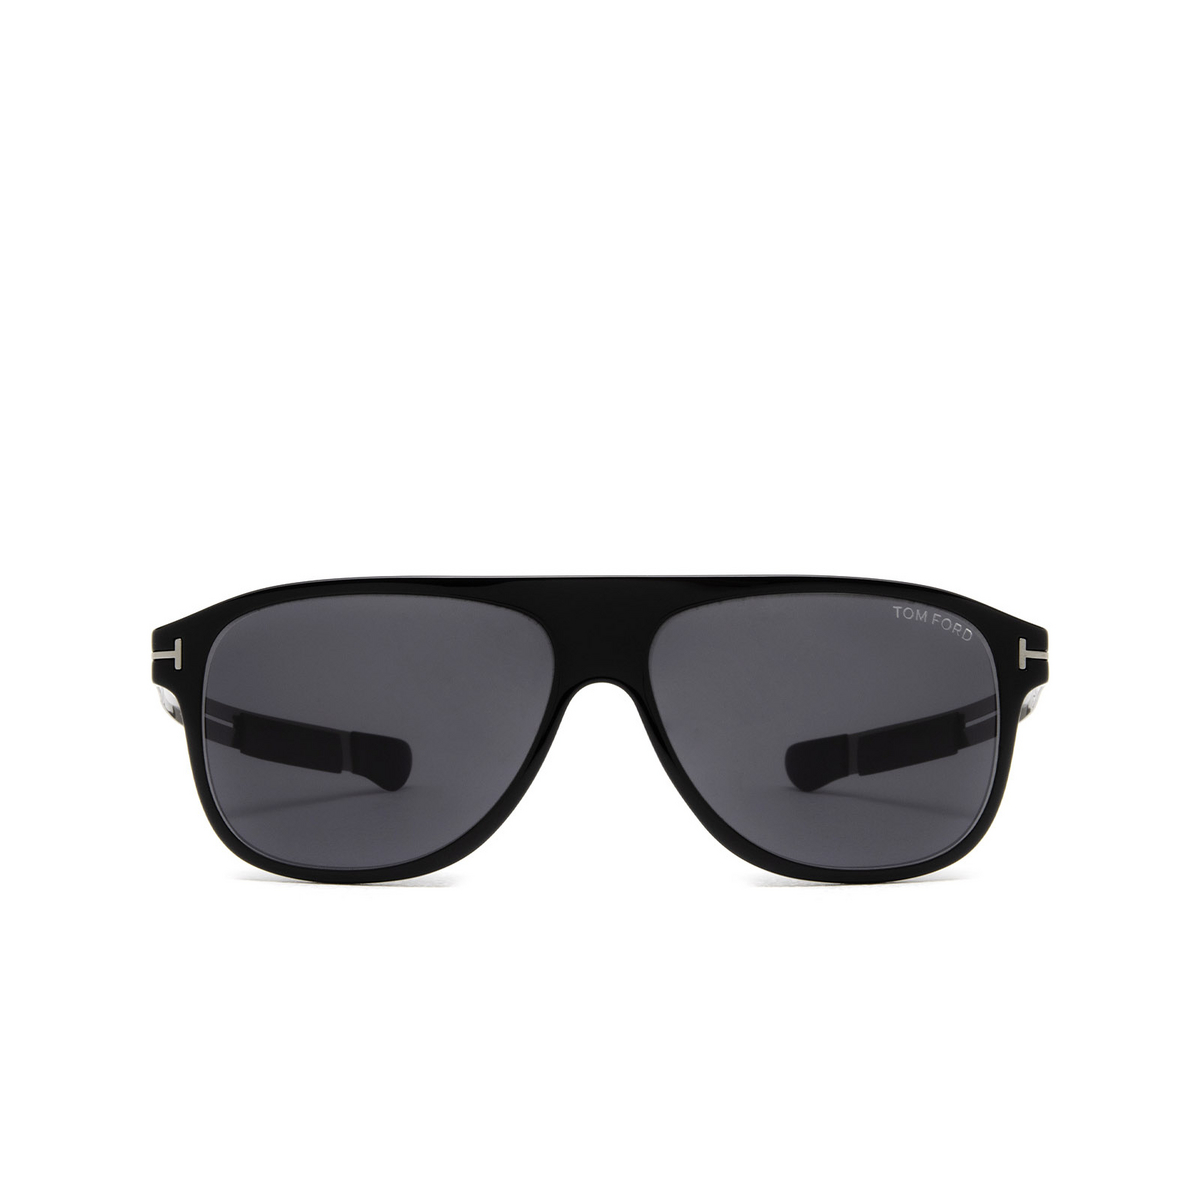 Tom Ford TODD Sunglasses 01A Black - front view